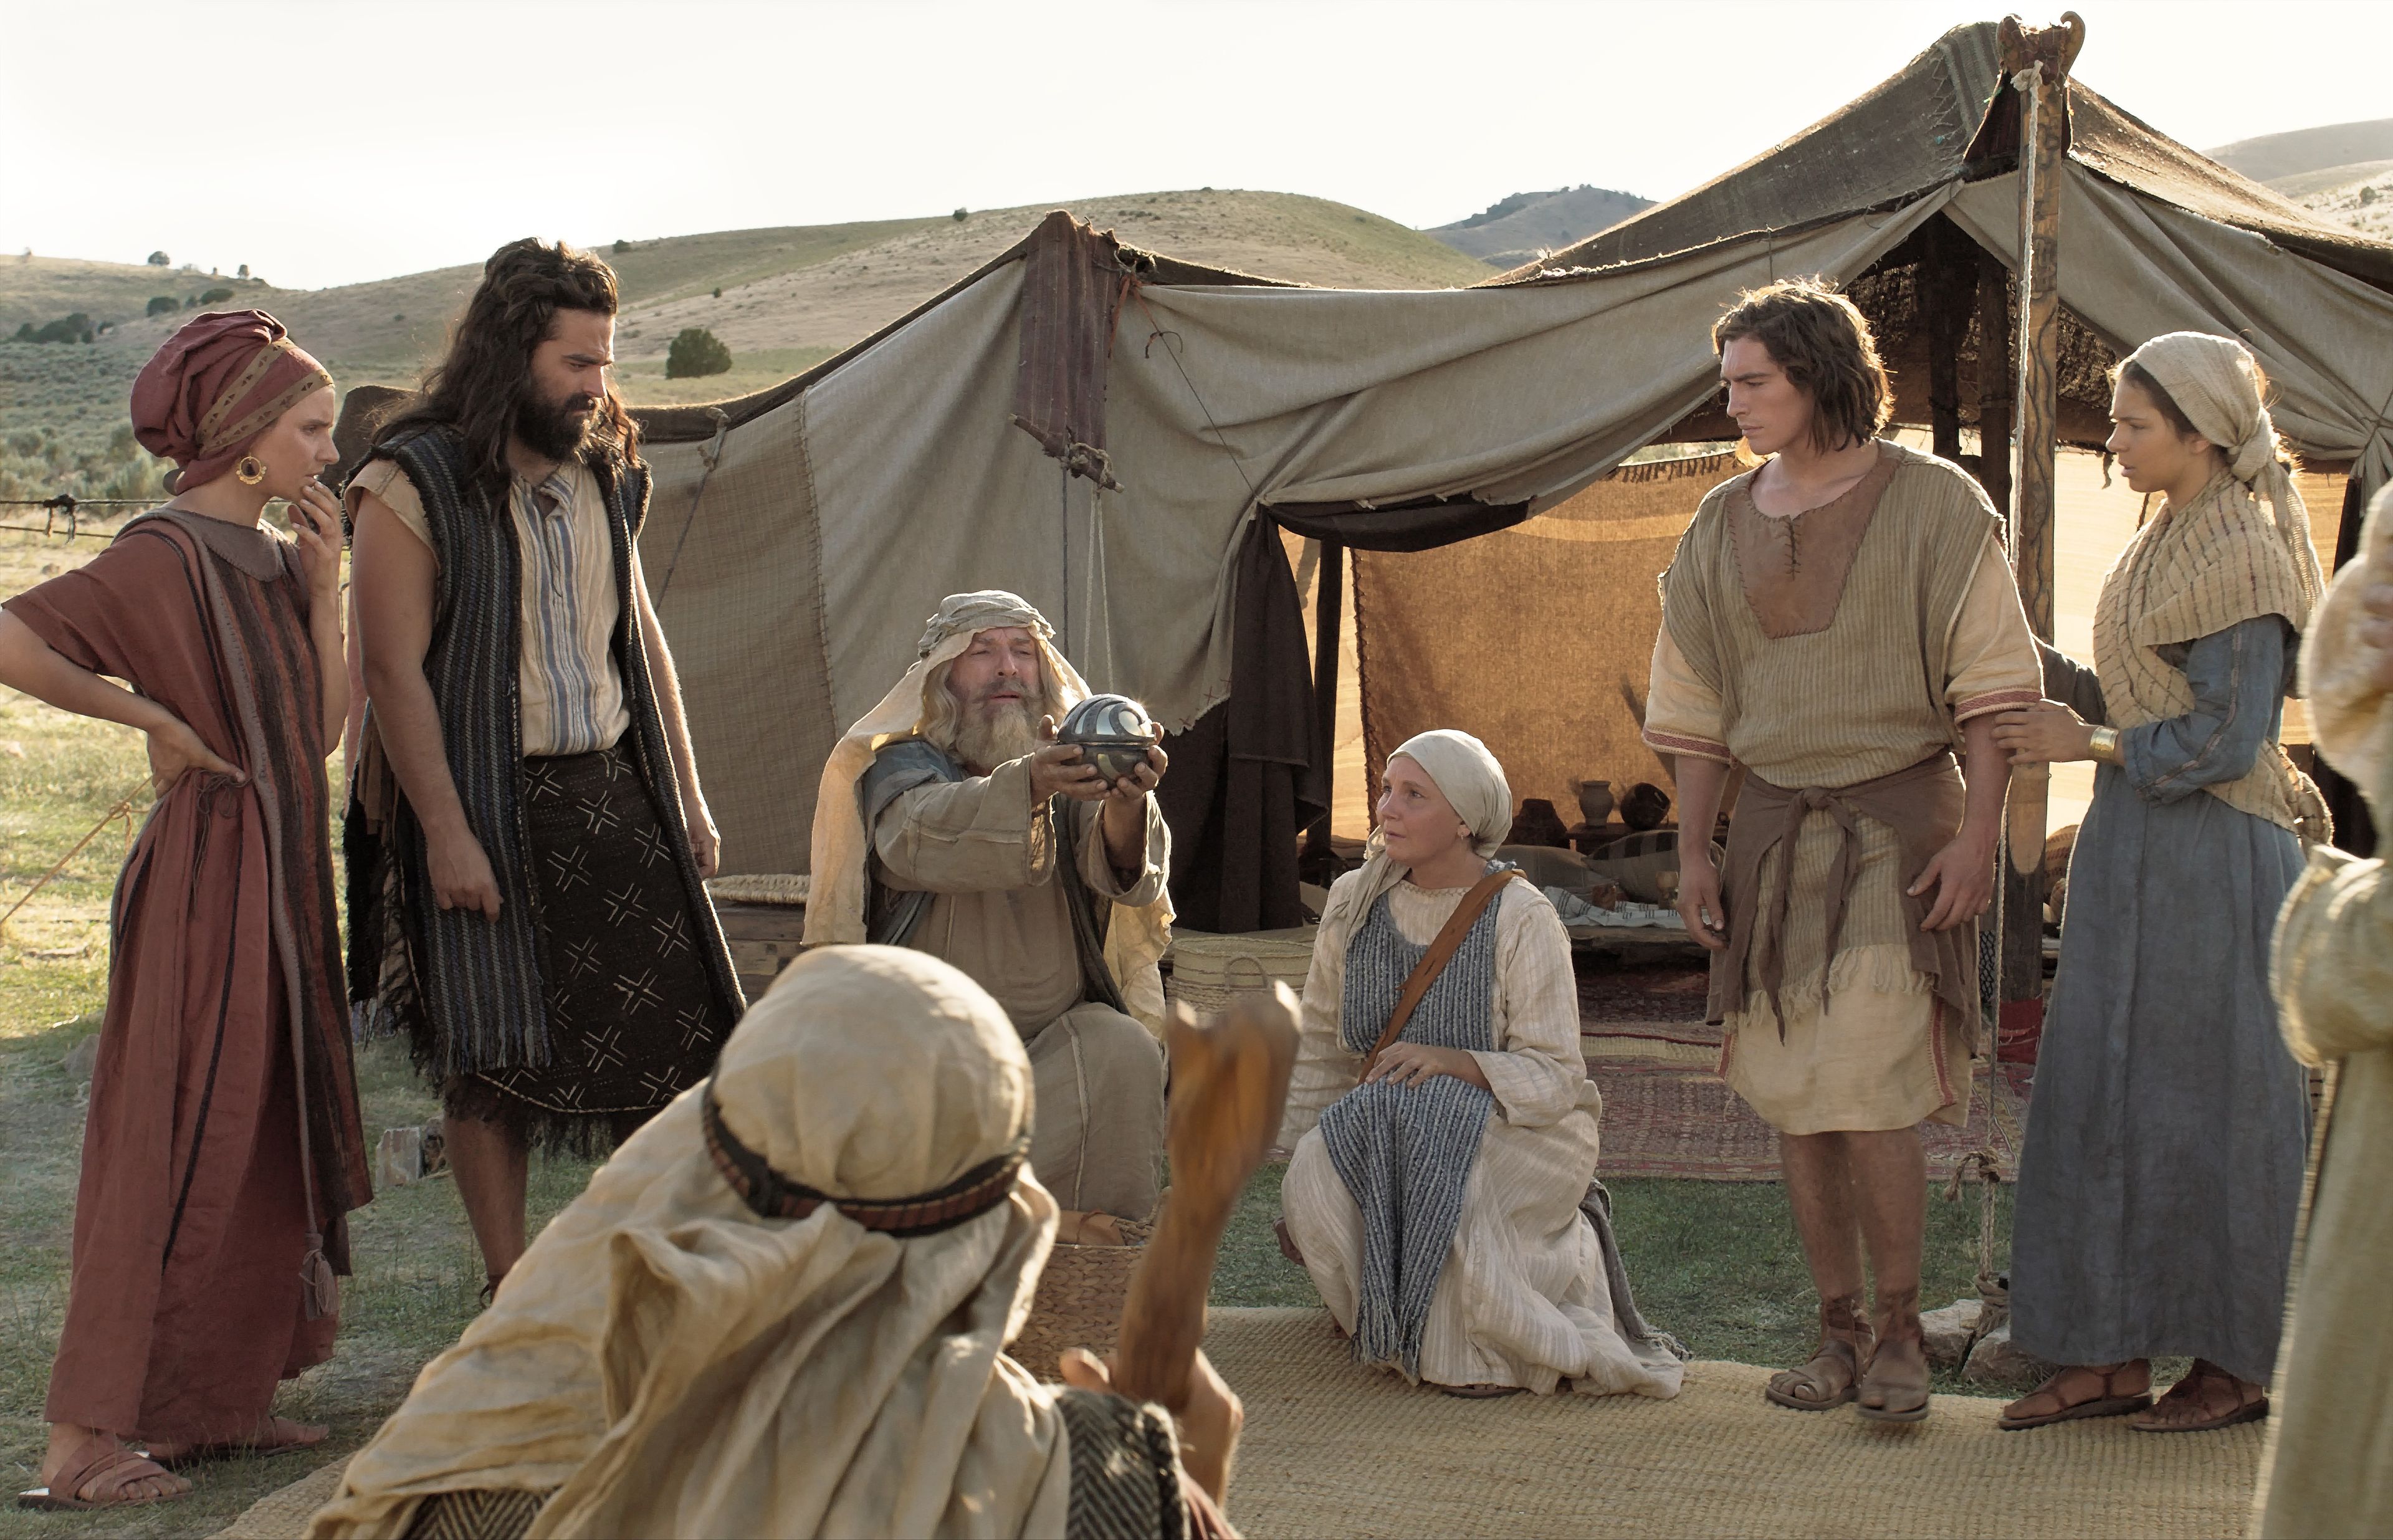 Lehi shows his family the Liahona in the wilderness.